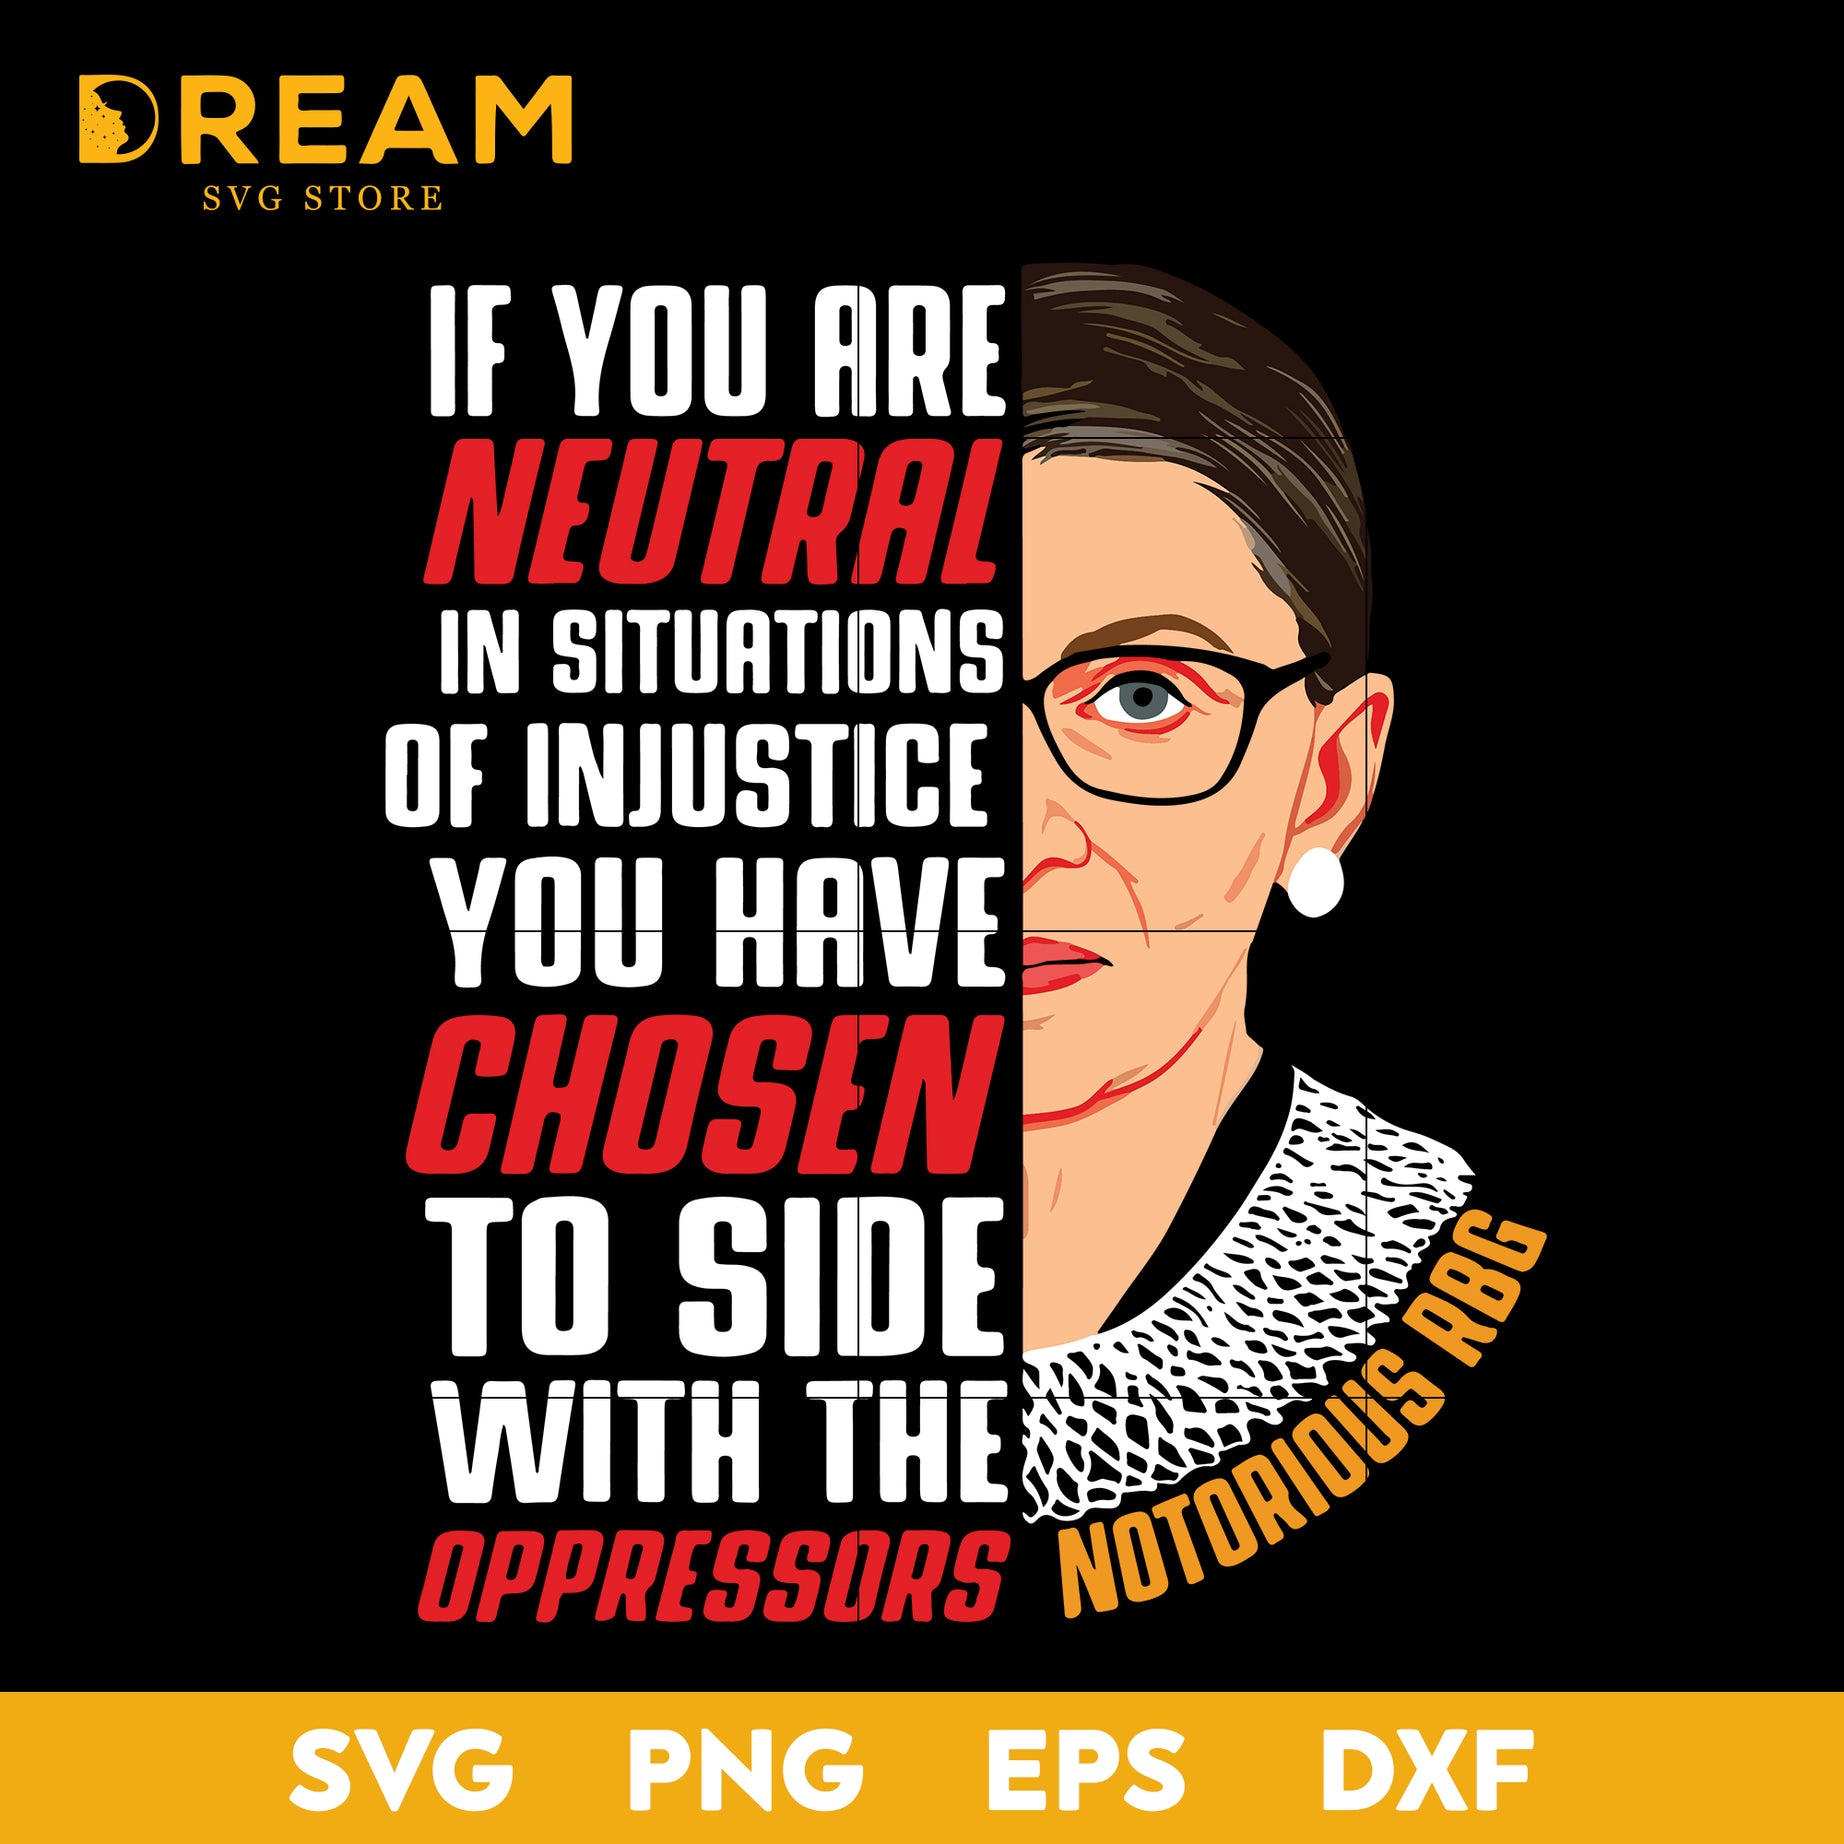 If you are neutral in siturtions of injustice you have chosen to side with the oppressors svg, Ruth Bader Ginsburg Notorious RBG svg, Trending svg, png, dxf, eps digital file TD19092017L